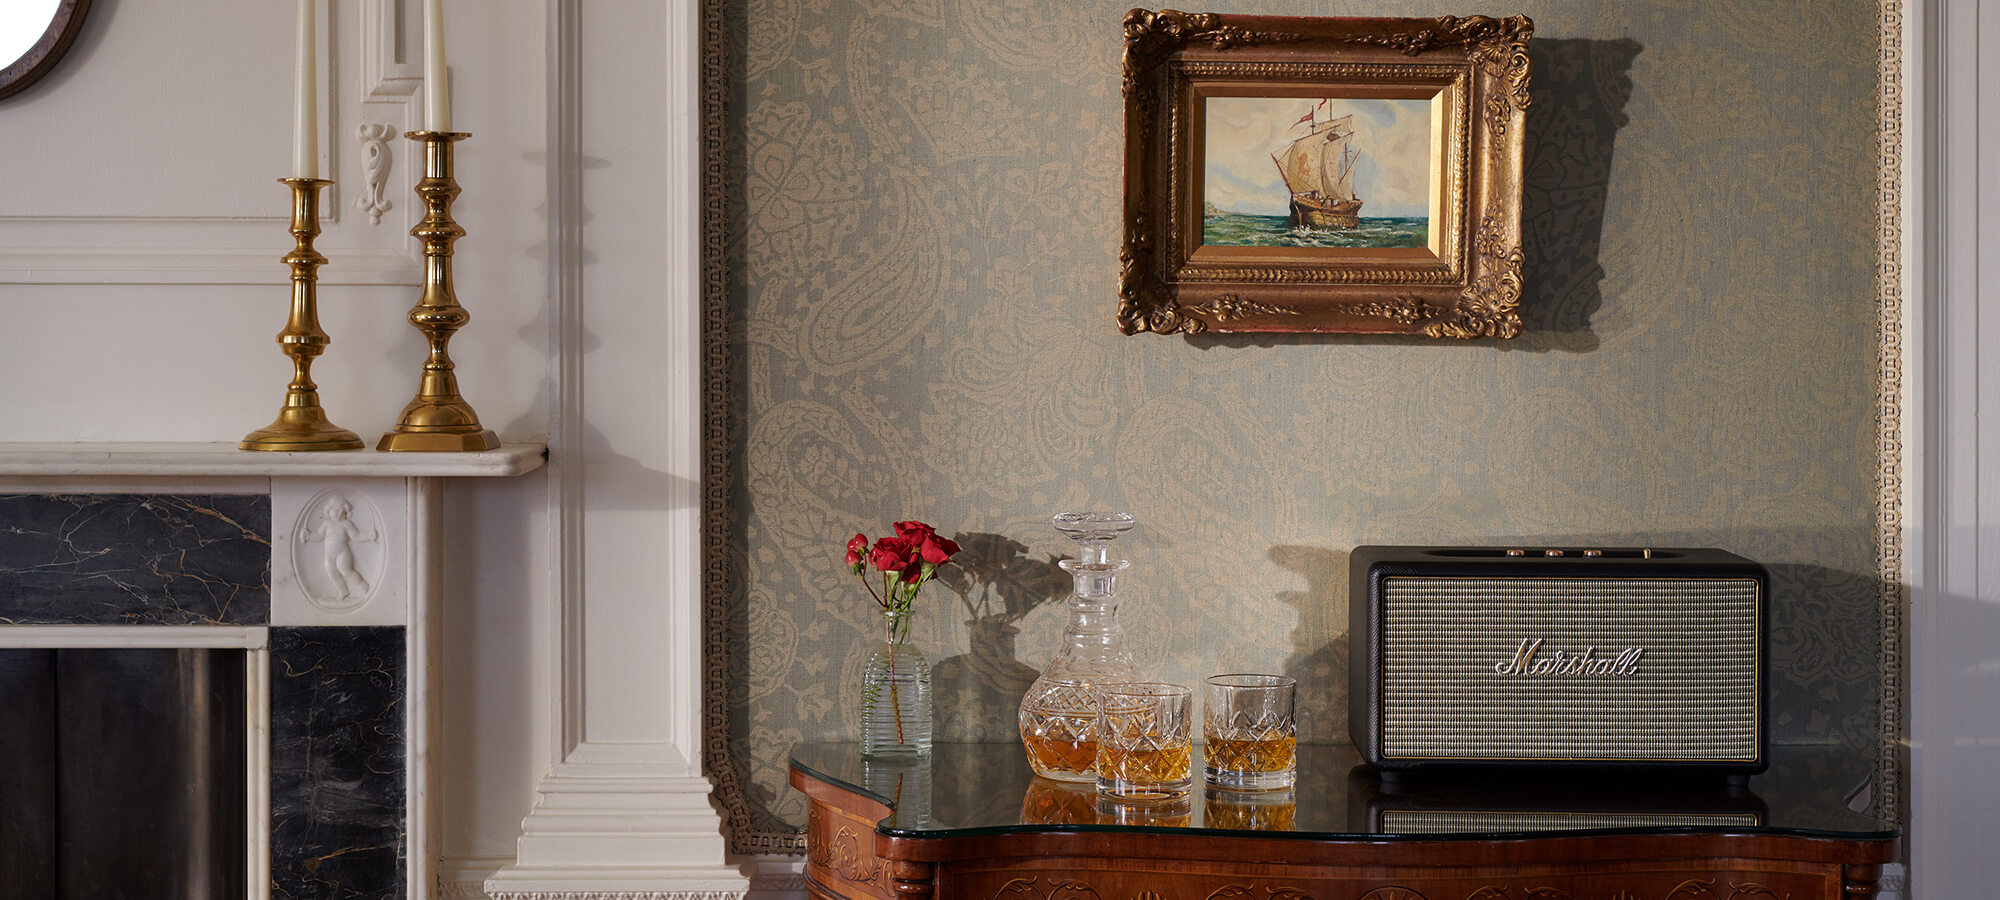 Two crystal glasses and decanter filled with whisky sit on a side table next to a vintage styled digital radio in the Royal Lochnagar Suite